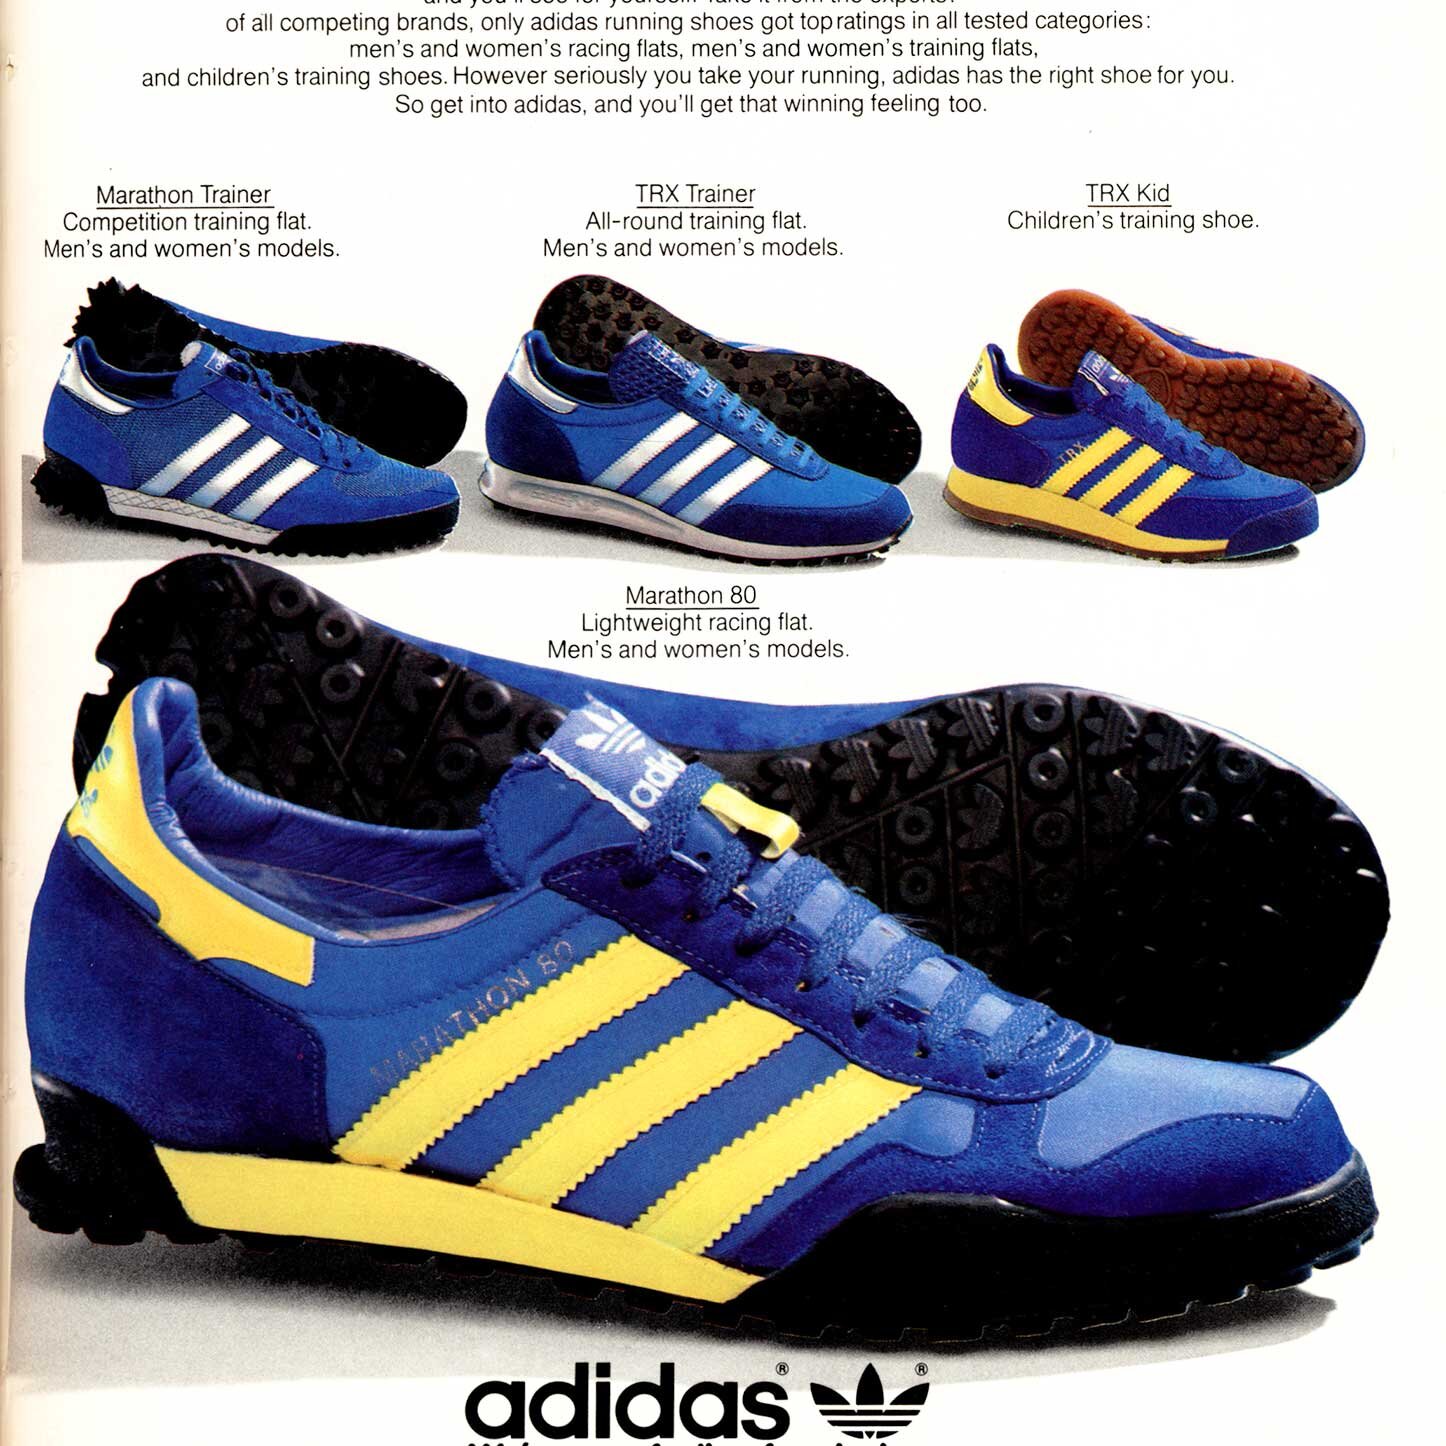 The Deffest®. A vintage and retro — adidas Marathon and TRX Trainer vintage sneaker ad